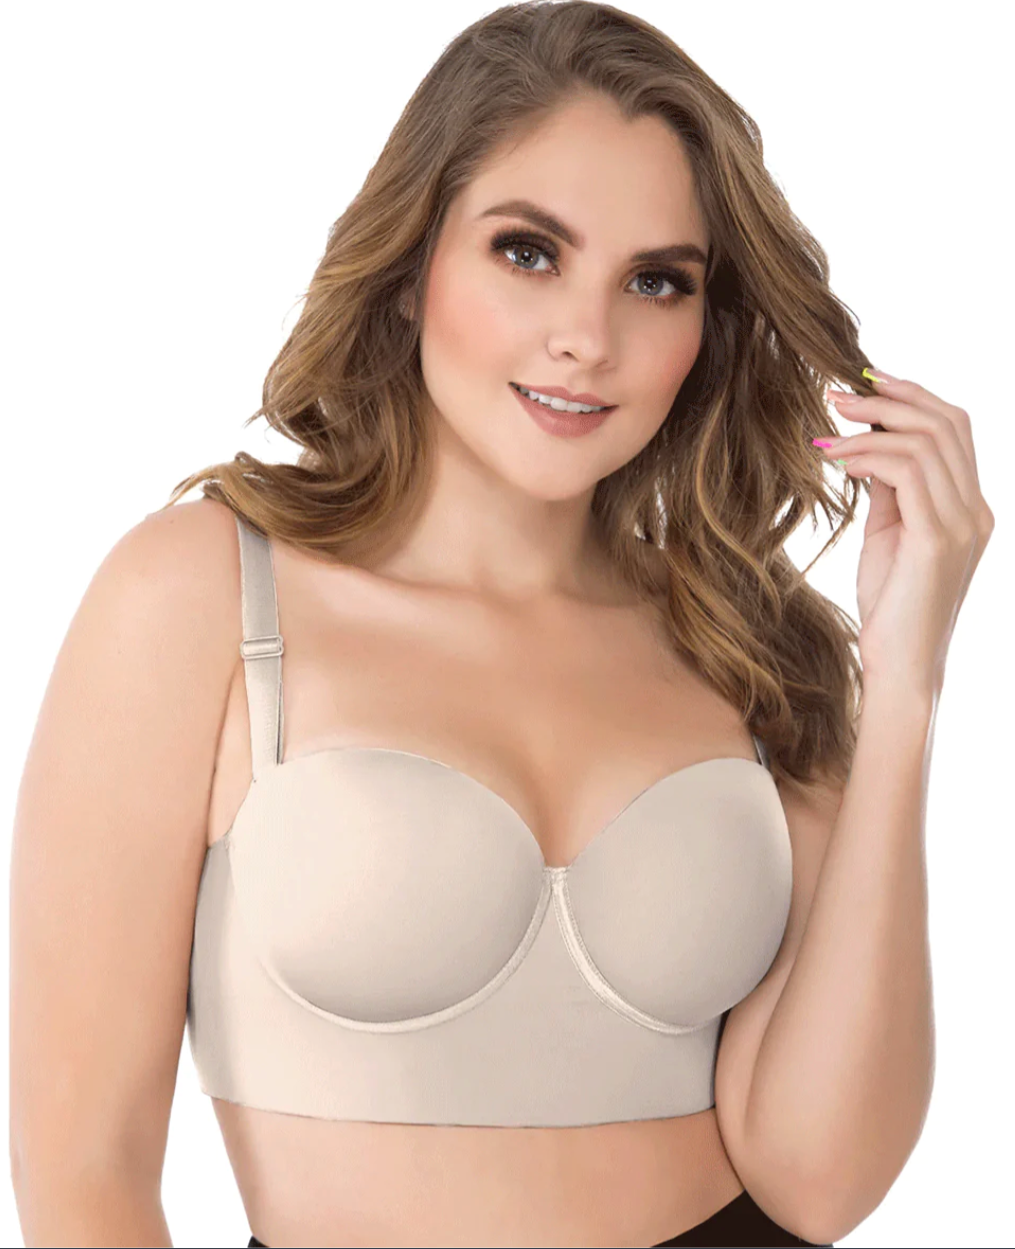 8532 o 8542 UP LADY Brassier 🇨🇴 push up extra firm, high compression,  back bulge control, with 3 rows of hooks.